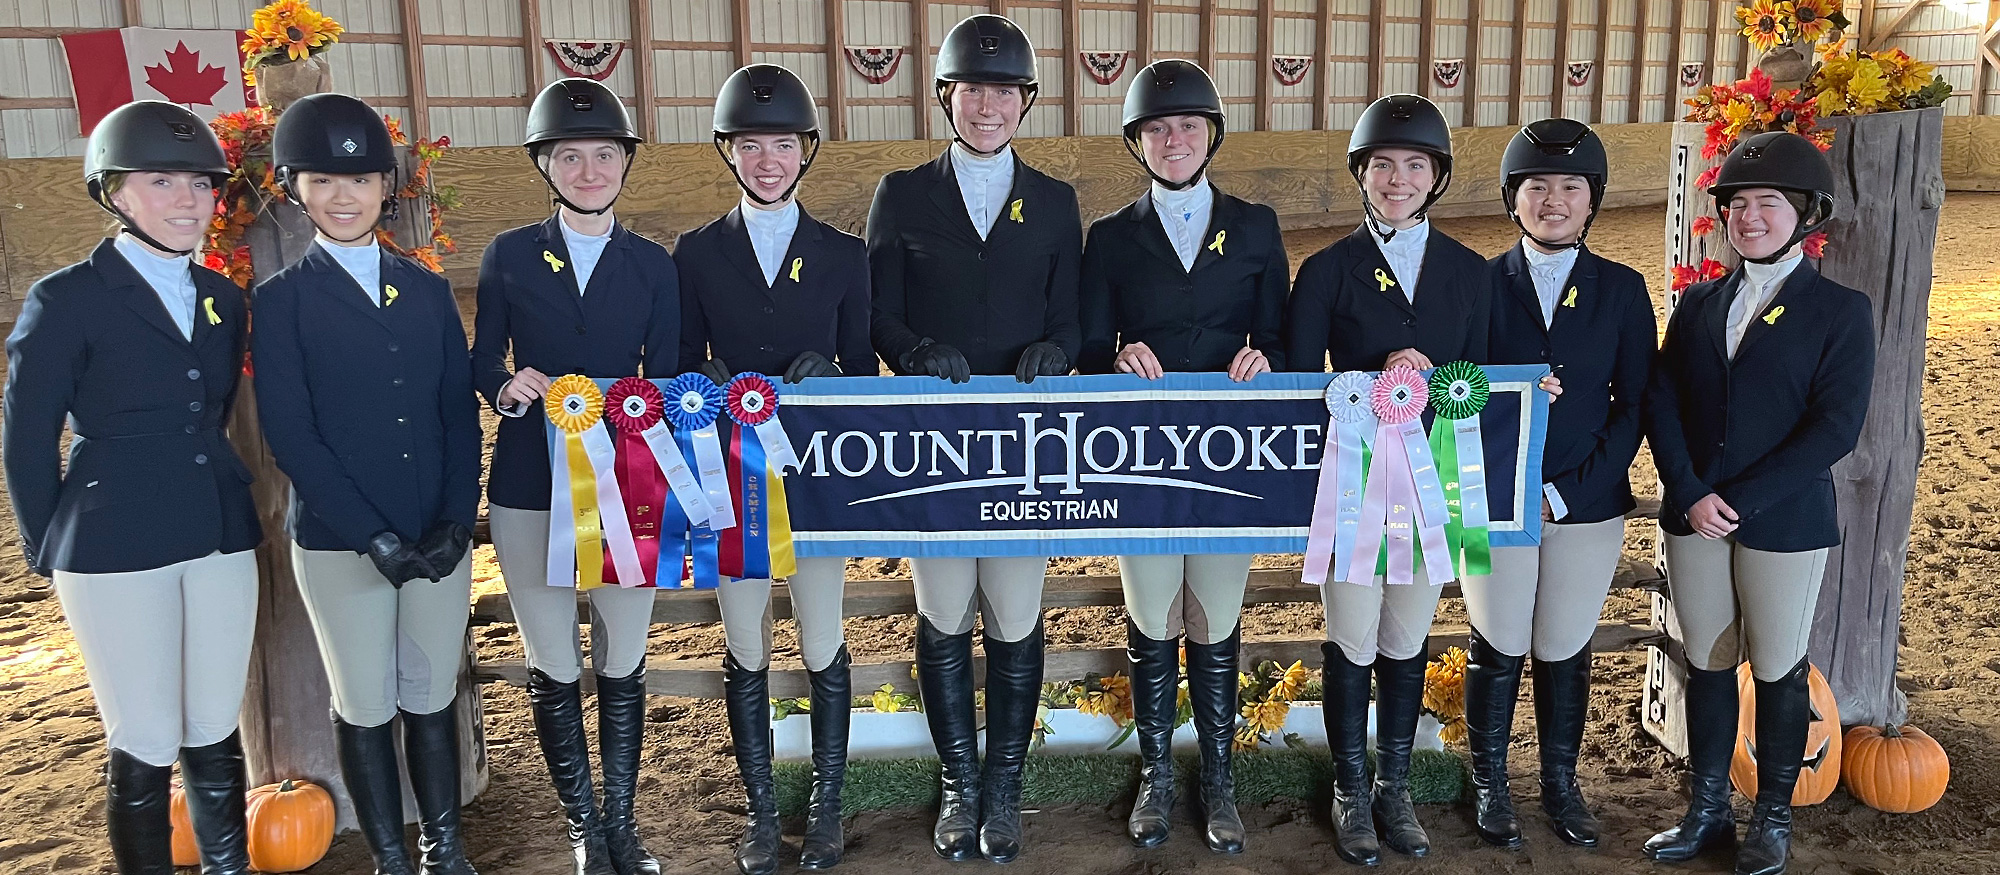 Nine members of the Mount Holyoke equestrian team competed competed in and finished seventh at the Pre-Season Tournament of Champions, hosted by the University of Michigan on Oct. 1, 2022.